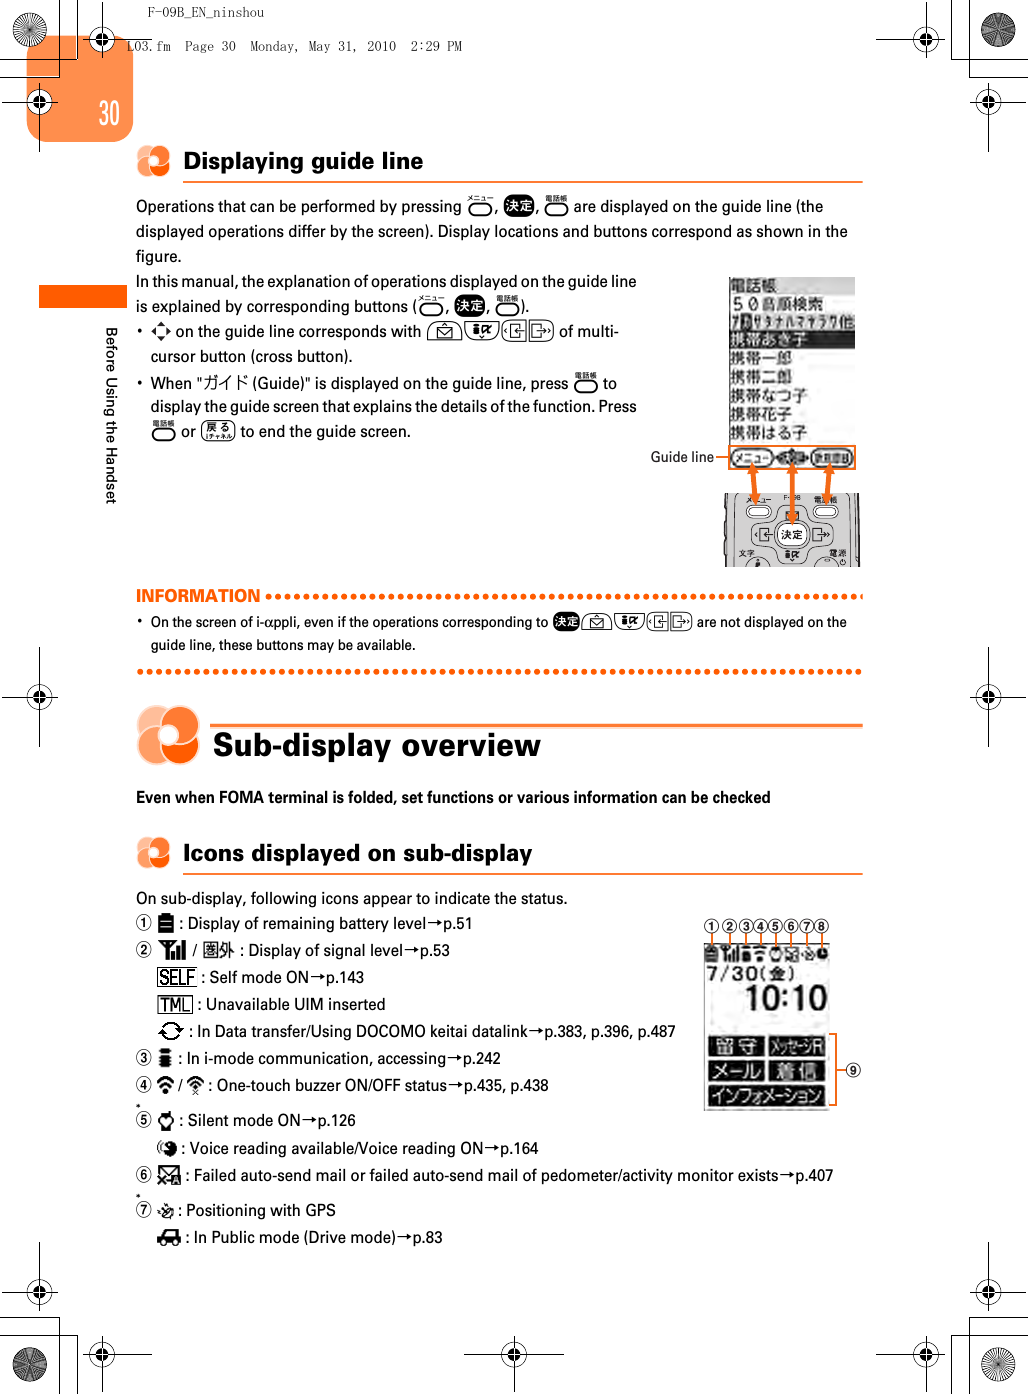 F-09B_EN_ninshou30Before Using the HandsetDisplaying guide lineOperations that can be performed by pressing m, g, p are displayed on the guide line (the displayed operations differ by the screen). Display locations and buttons correspond as shown in the figure.In this manual, the explanation of operations displayed on the guide line is explained by corresponding buttons (m, g, p).･ on the guide line corresponds with udlr of multi-cursor button (cross button).･When &quot;ガイド (Guide)&quot; is displayed on the guide line, press p to display the guide screen that explains the details of the function. Press p or c to end the guide screen.INFORMATION･On the screen of i-αppli, even if the operations corresponding to gudlr are not displayed on the guide line, these buttons may be available.Sub-display overviewEven when FOMA terminal is folded, set functions or various information can be checkedIcons displayed on sub-displayOn sub-display, following icons appear to indicate the status.a : Display of remaining battery level→p.51b /   : Display of signal level→p.53 : Self mode ON→p.143 : Unavailable UIM inserted : In Data transfer/Using DOCOMO keitai datalink→p.383, p.396, p.487c : In i-mode communication, accessing→p.242d /   : One-touch buzzer ON/OFF status→p.435, p.438*e : Silent mode ON→p.126 : Voice reading available/Voice reading ON→p.164f : Failed auto-send mail or failed auto-send mail of pedometer/activity monitor exists→p.407*g : Positioning with GPS : In Public mode (Drive mode)→p.83Guide linea bc fghdeiL03.fm  Page 30  Monday, May 31, 2010  2:29 PM